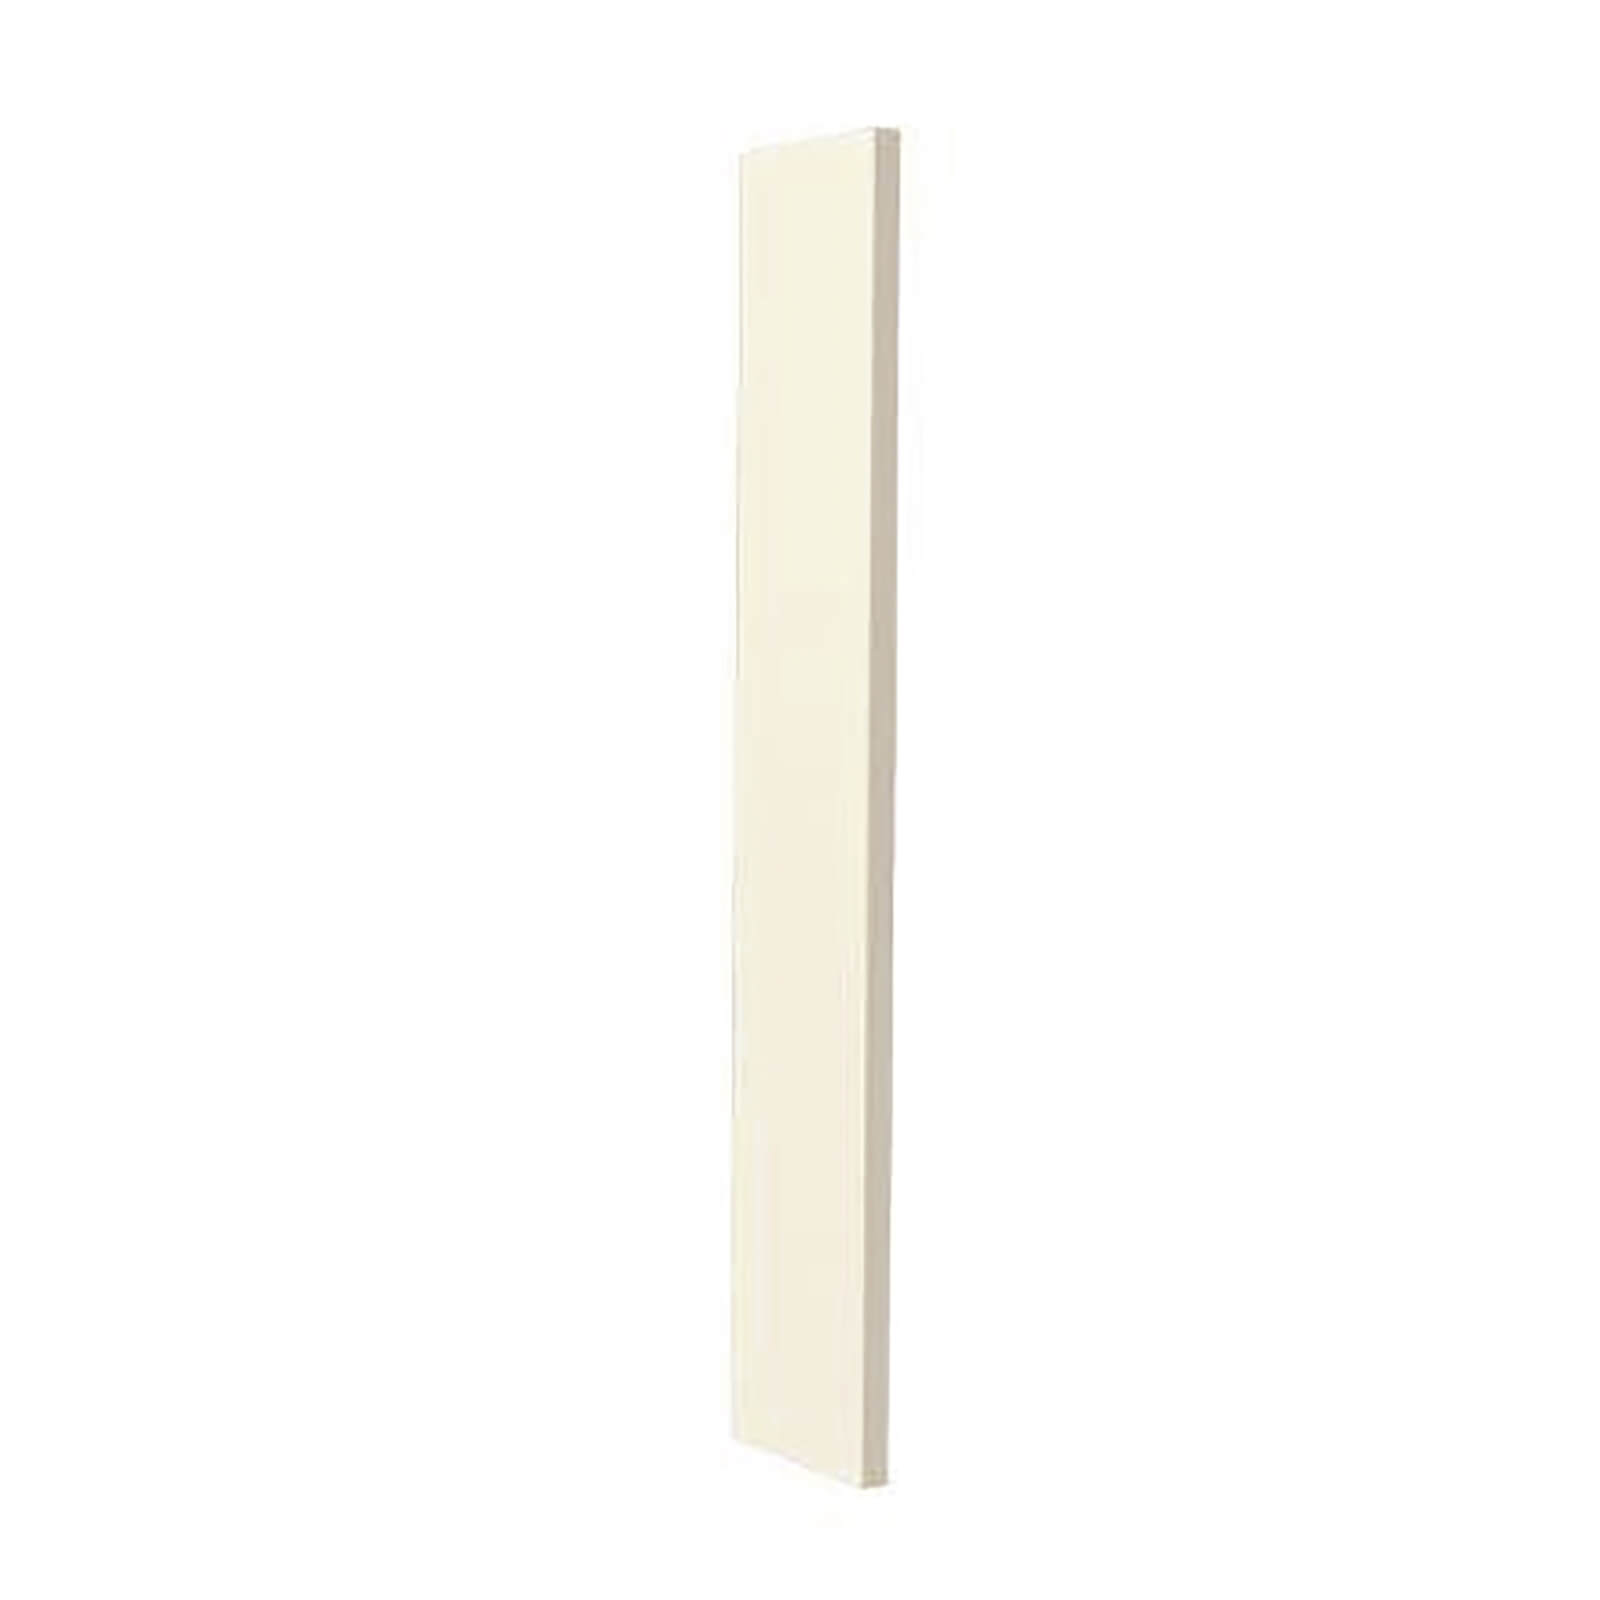 Timber Shaker Ivory Painted Adjustable Corner Post and Filler